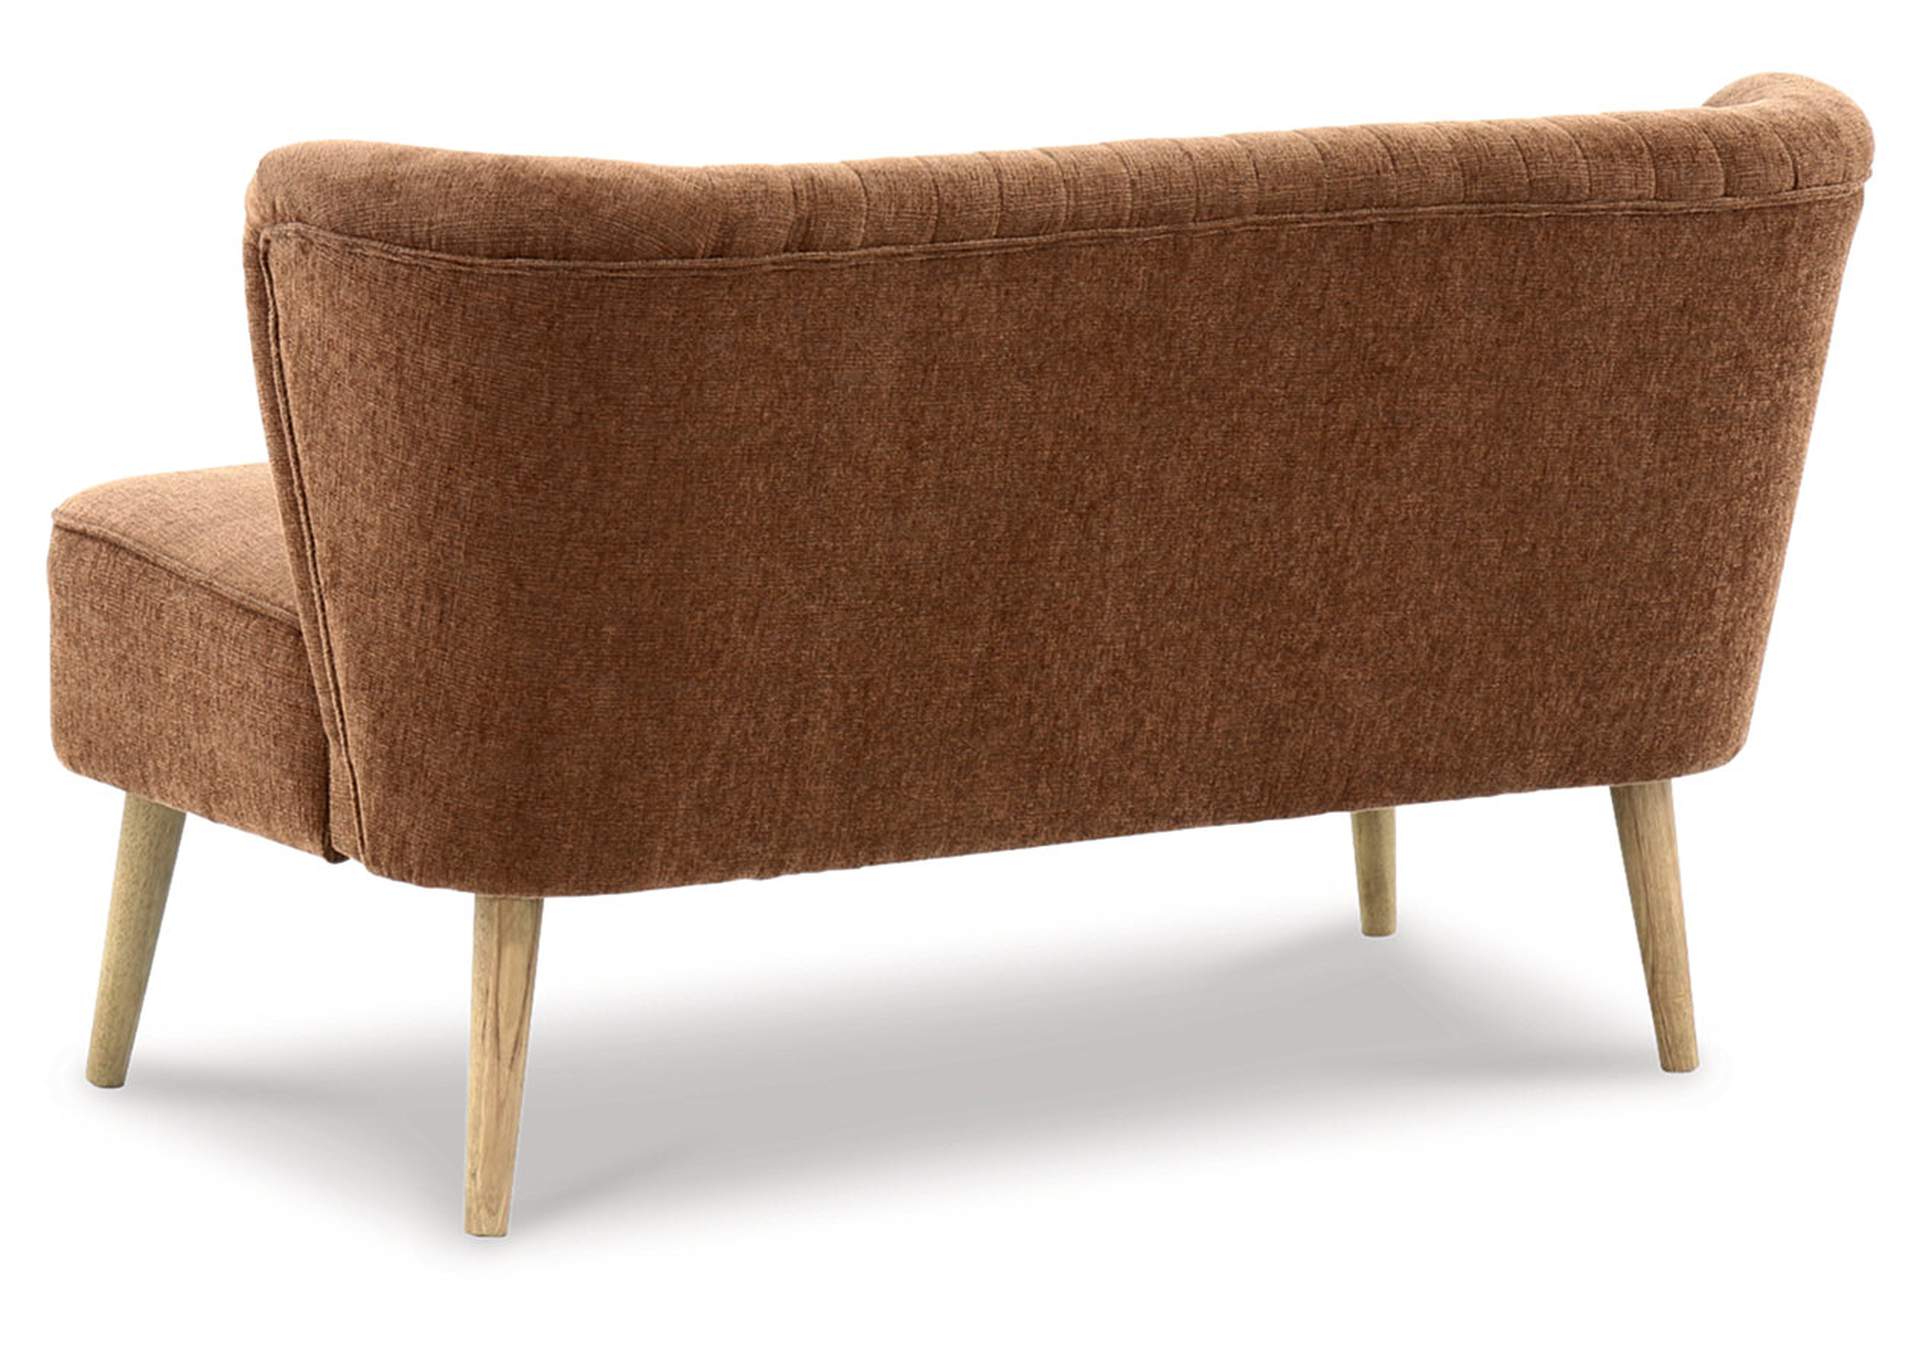 Collbury Accent Bench,Signature Design By Ashley